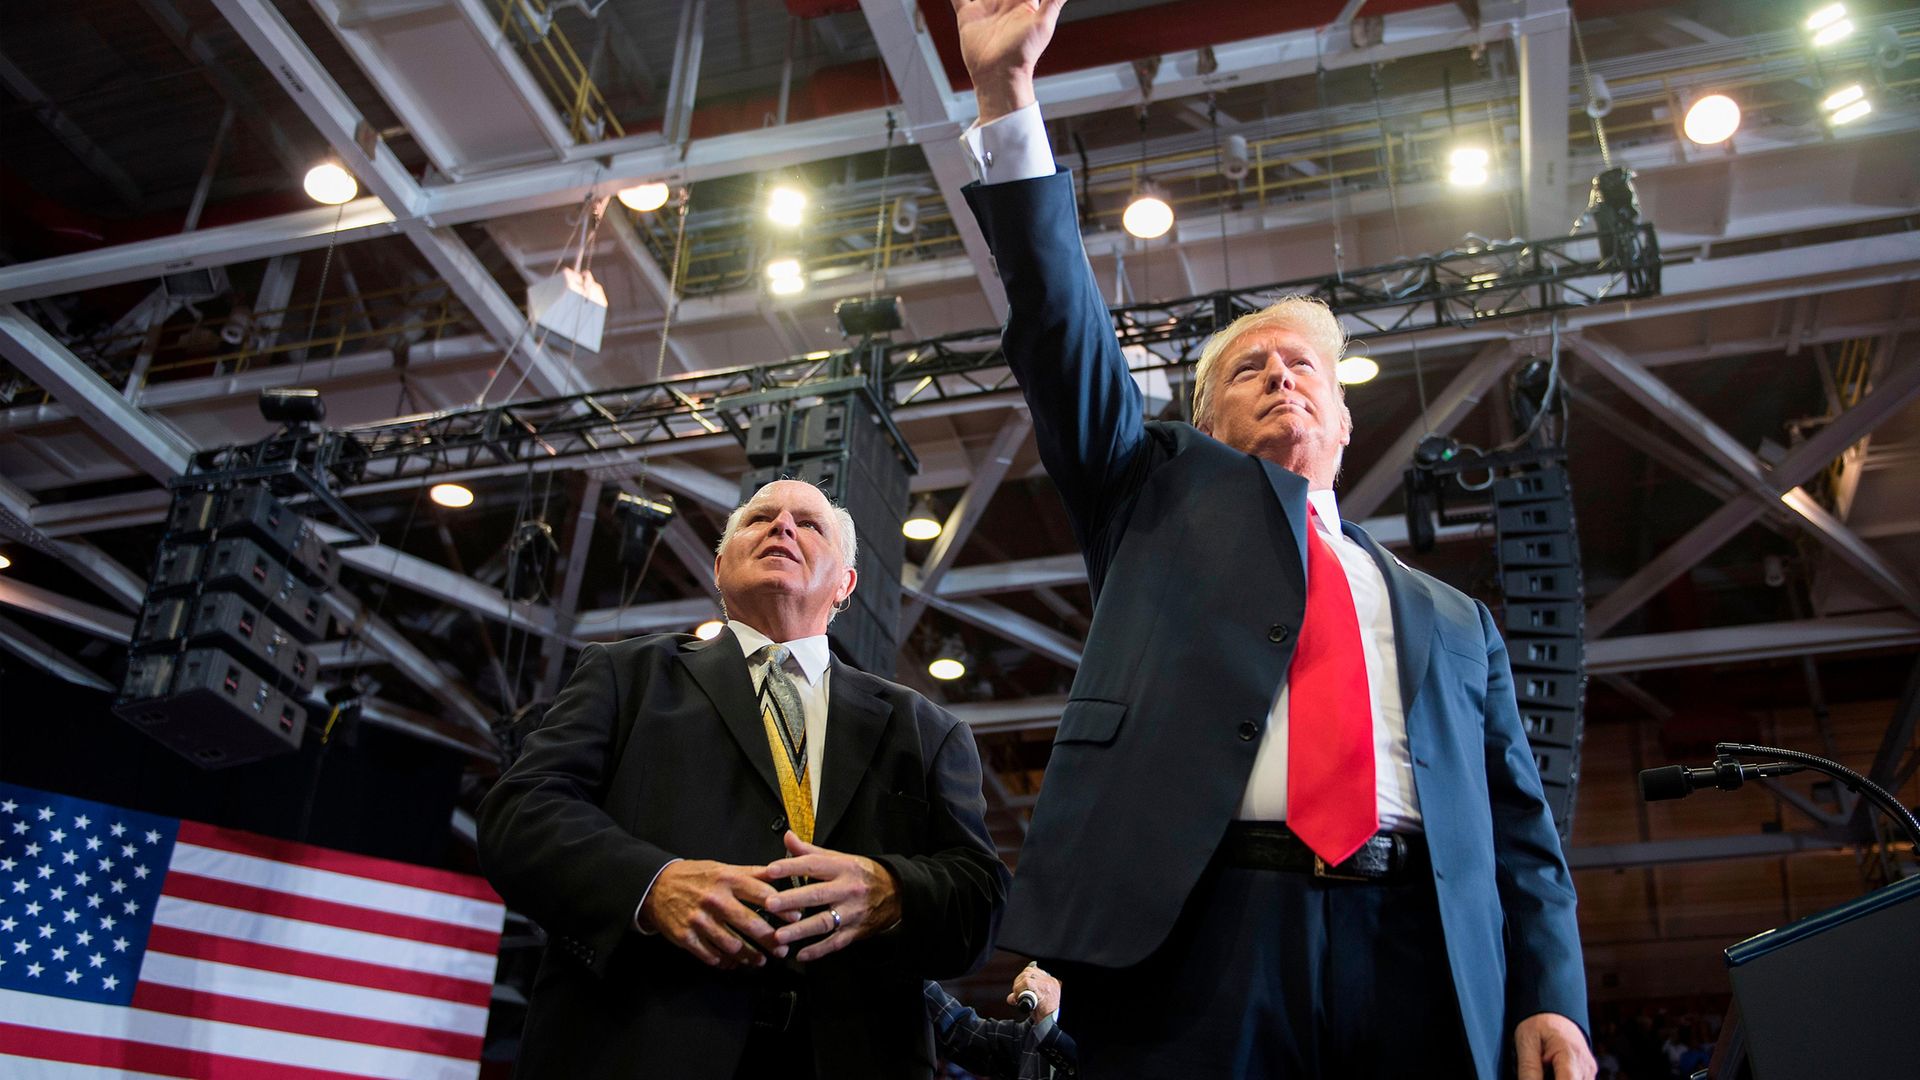 Donald Trump and radio talk show host Rush Limbaugh at a Make America Great Again rally in Cape Girardeau, Missouri in 2018 - Credit: AFP via Getty Images